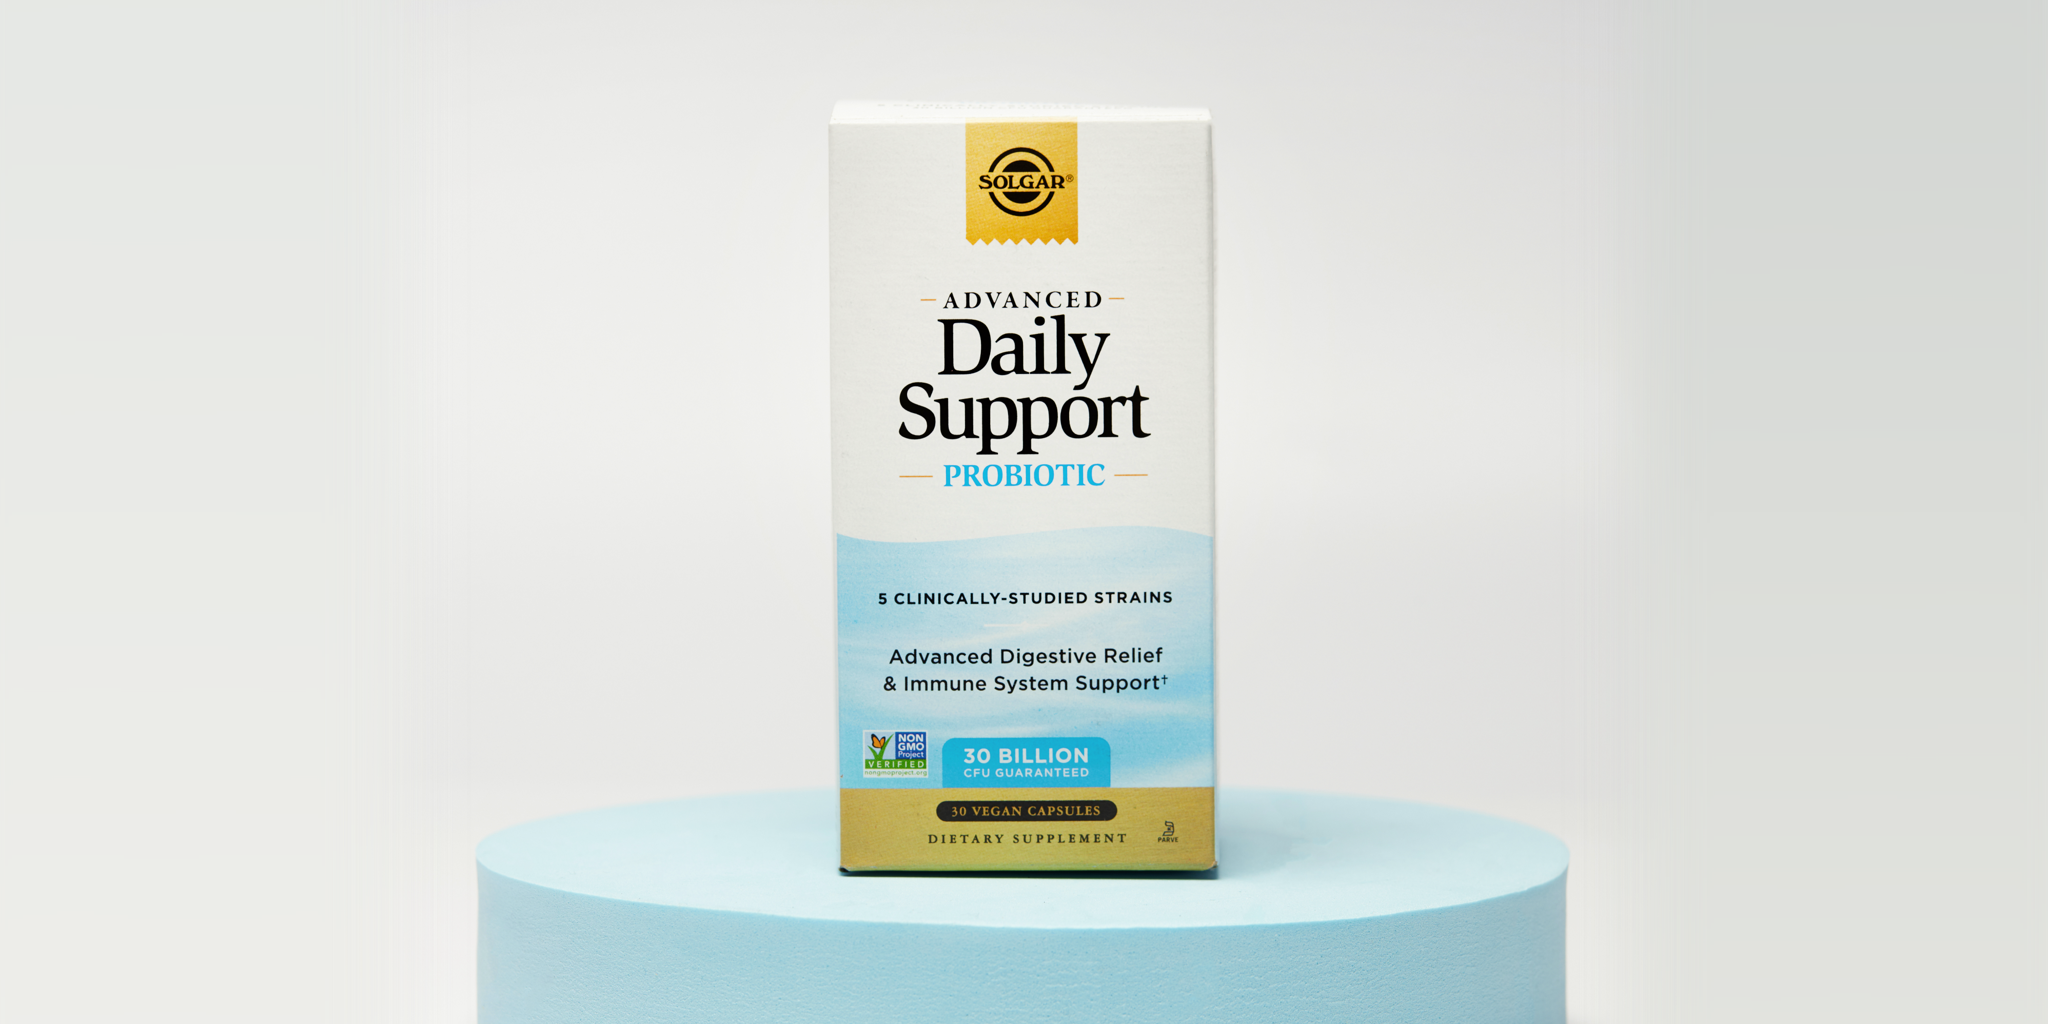 A box of Solgar Advanced Daily Support probiotic sittin on a blue circular riser against a white background.